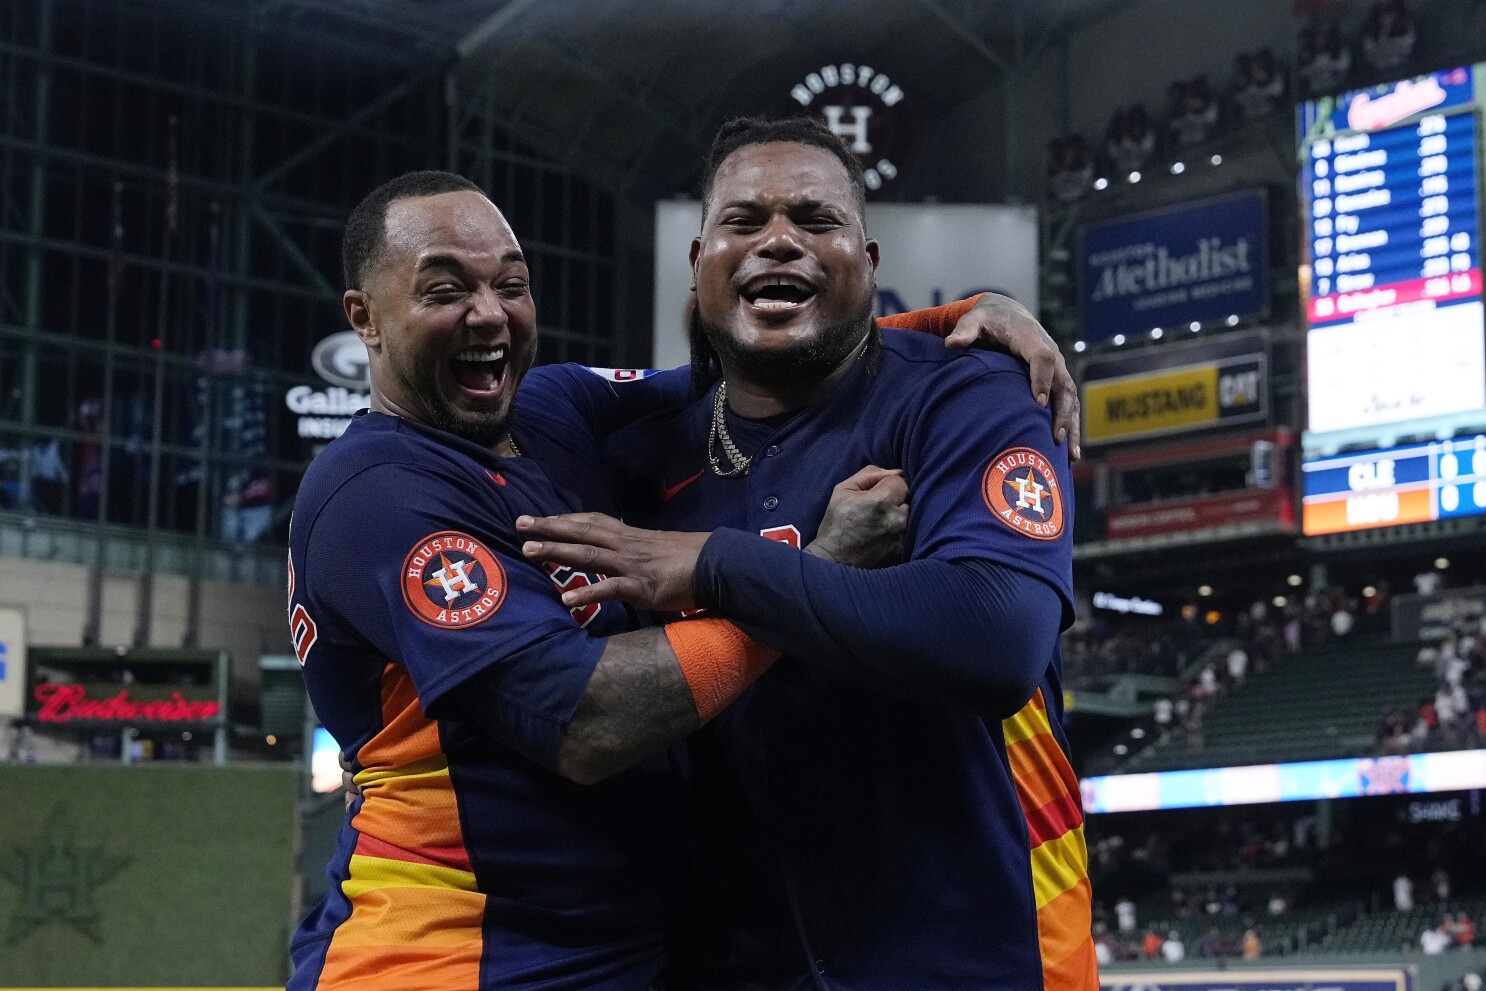 Report: Rival officials surprised by Astros players' lack of